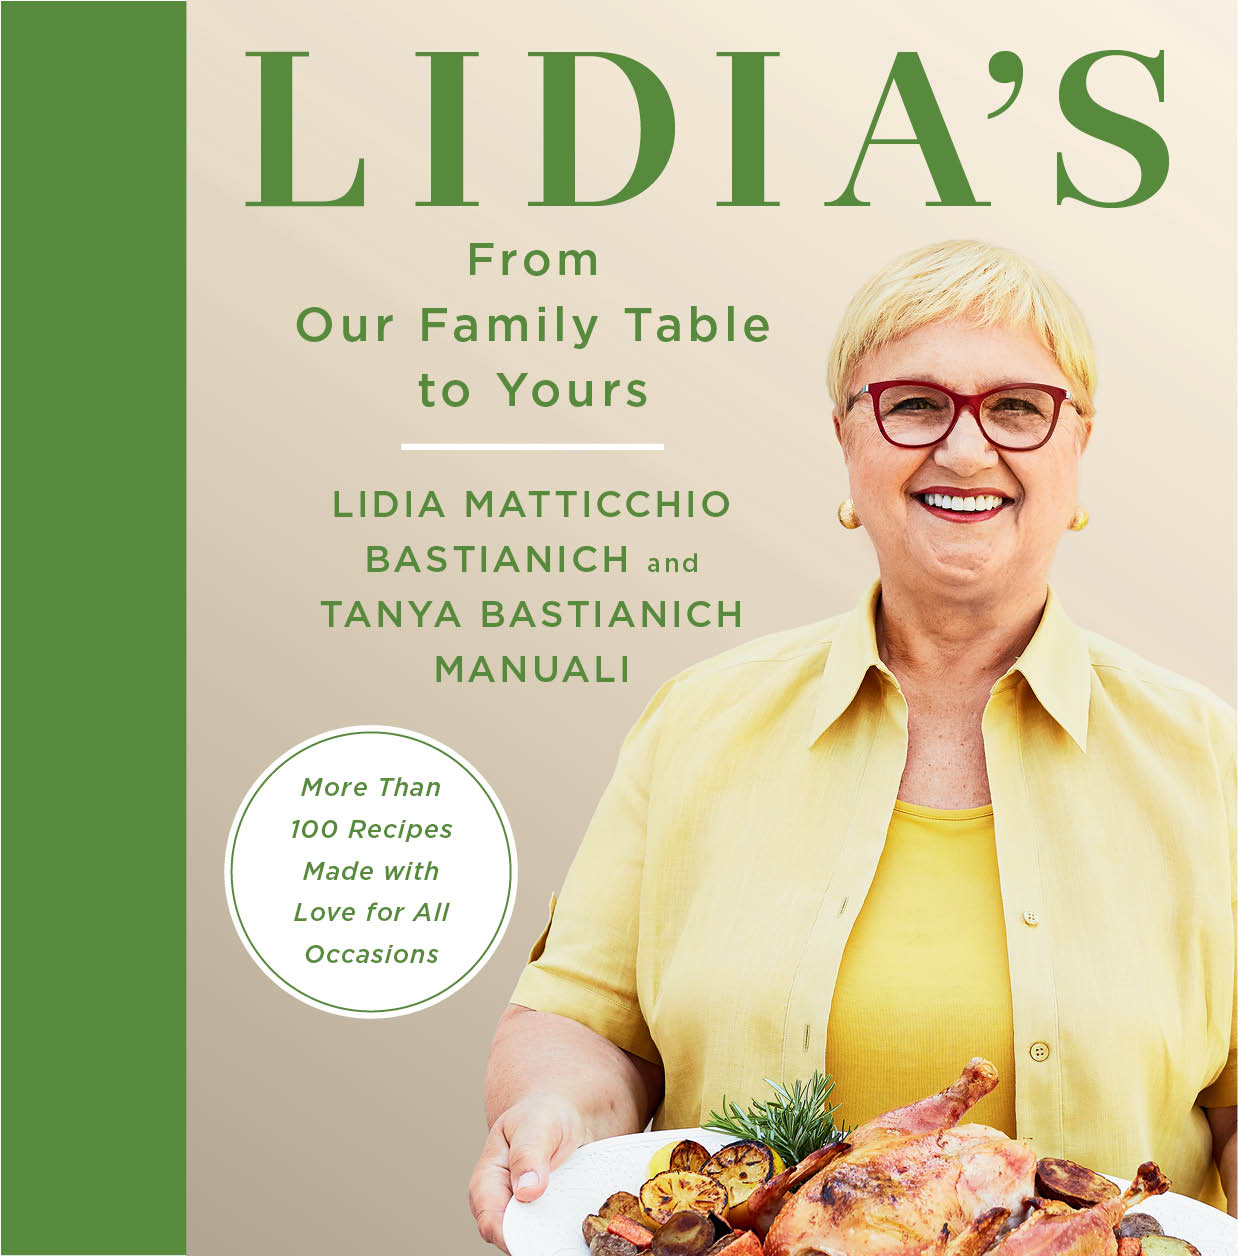 Lidia’s From Our Family Table to Yours